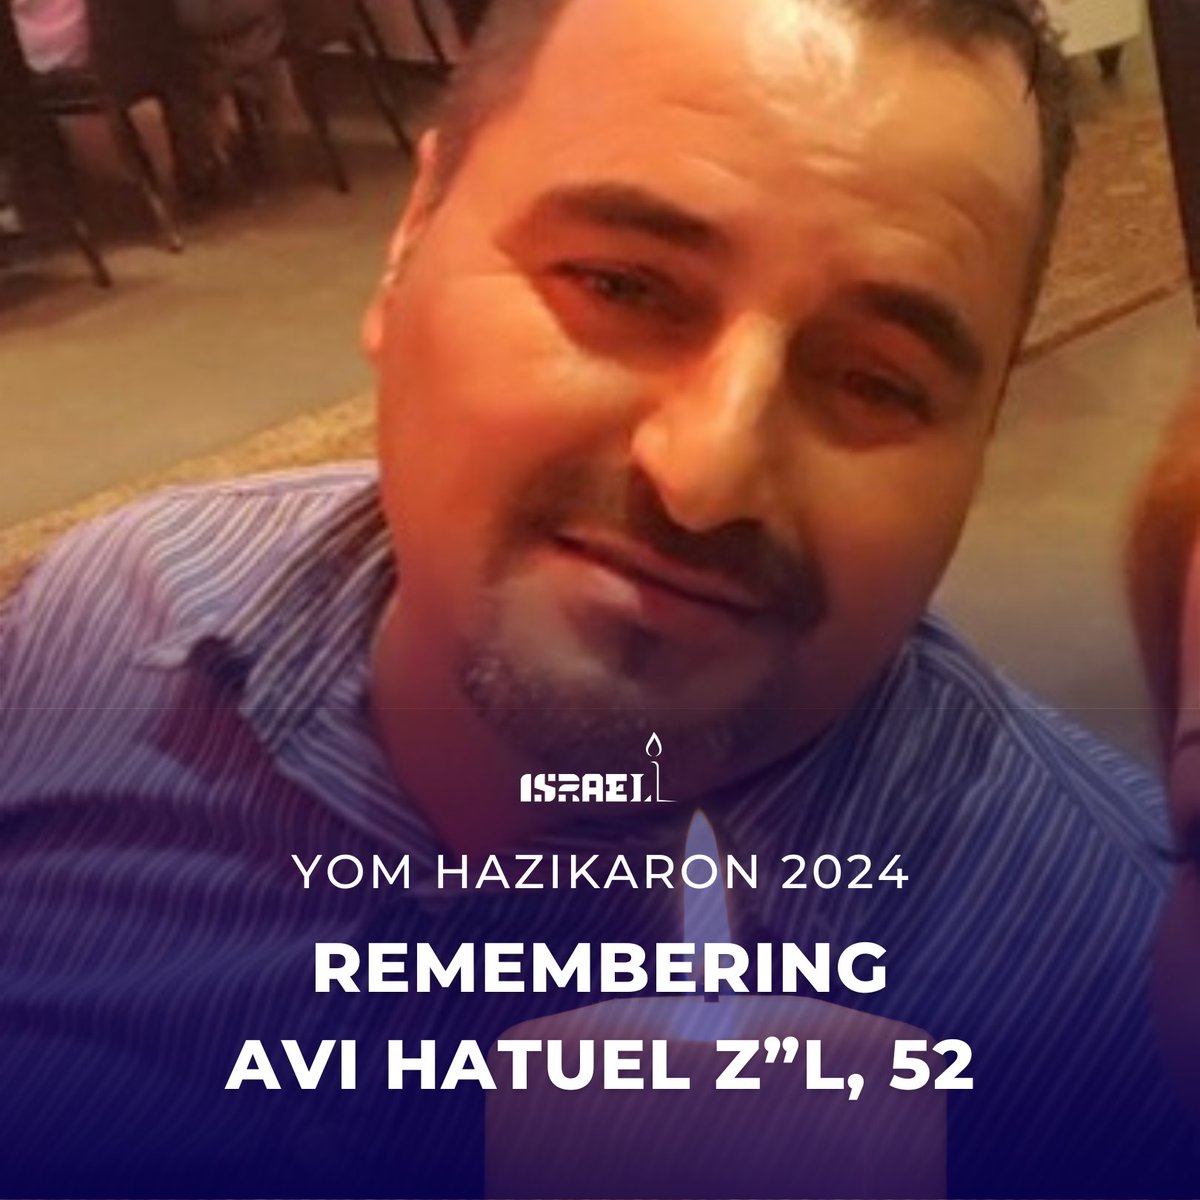 On October 7th, Avi Hatuel heard gunshots outside his home in Ofakim and told his family to hide in the bomb shelter. He went outside and was shot to death. The terrorists then moved on believing that Avi was the only one home. Even in death Avi protected his family. May